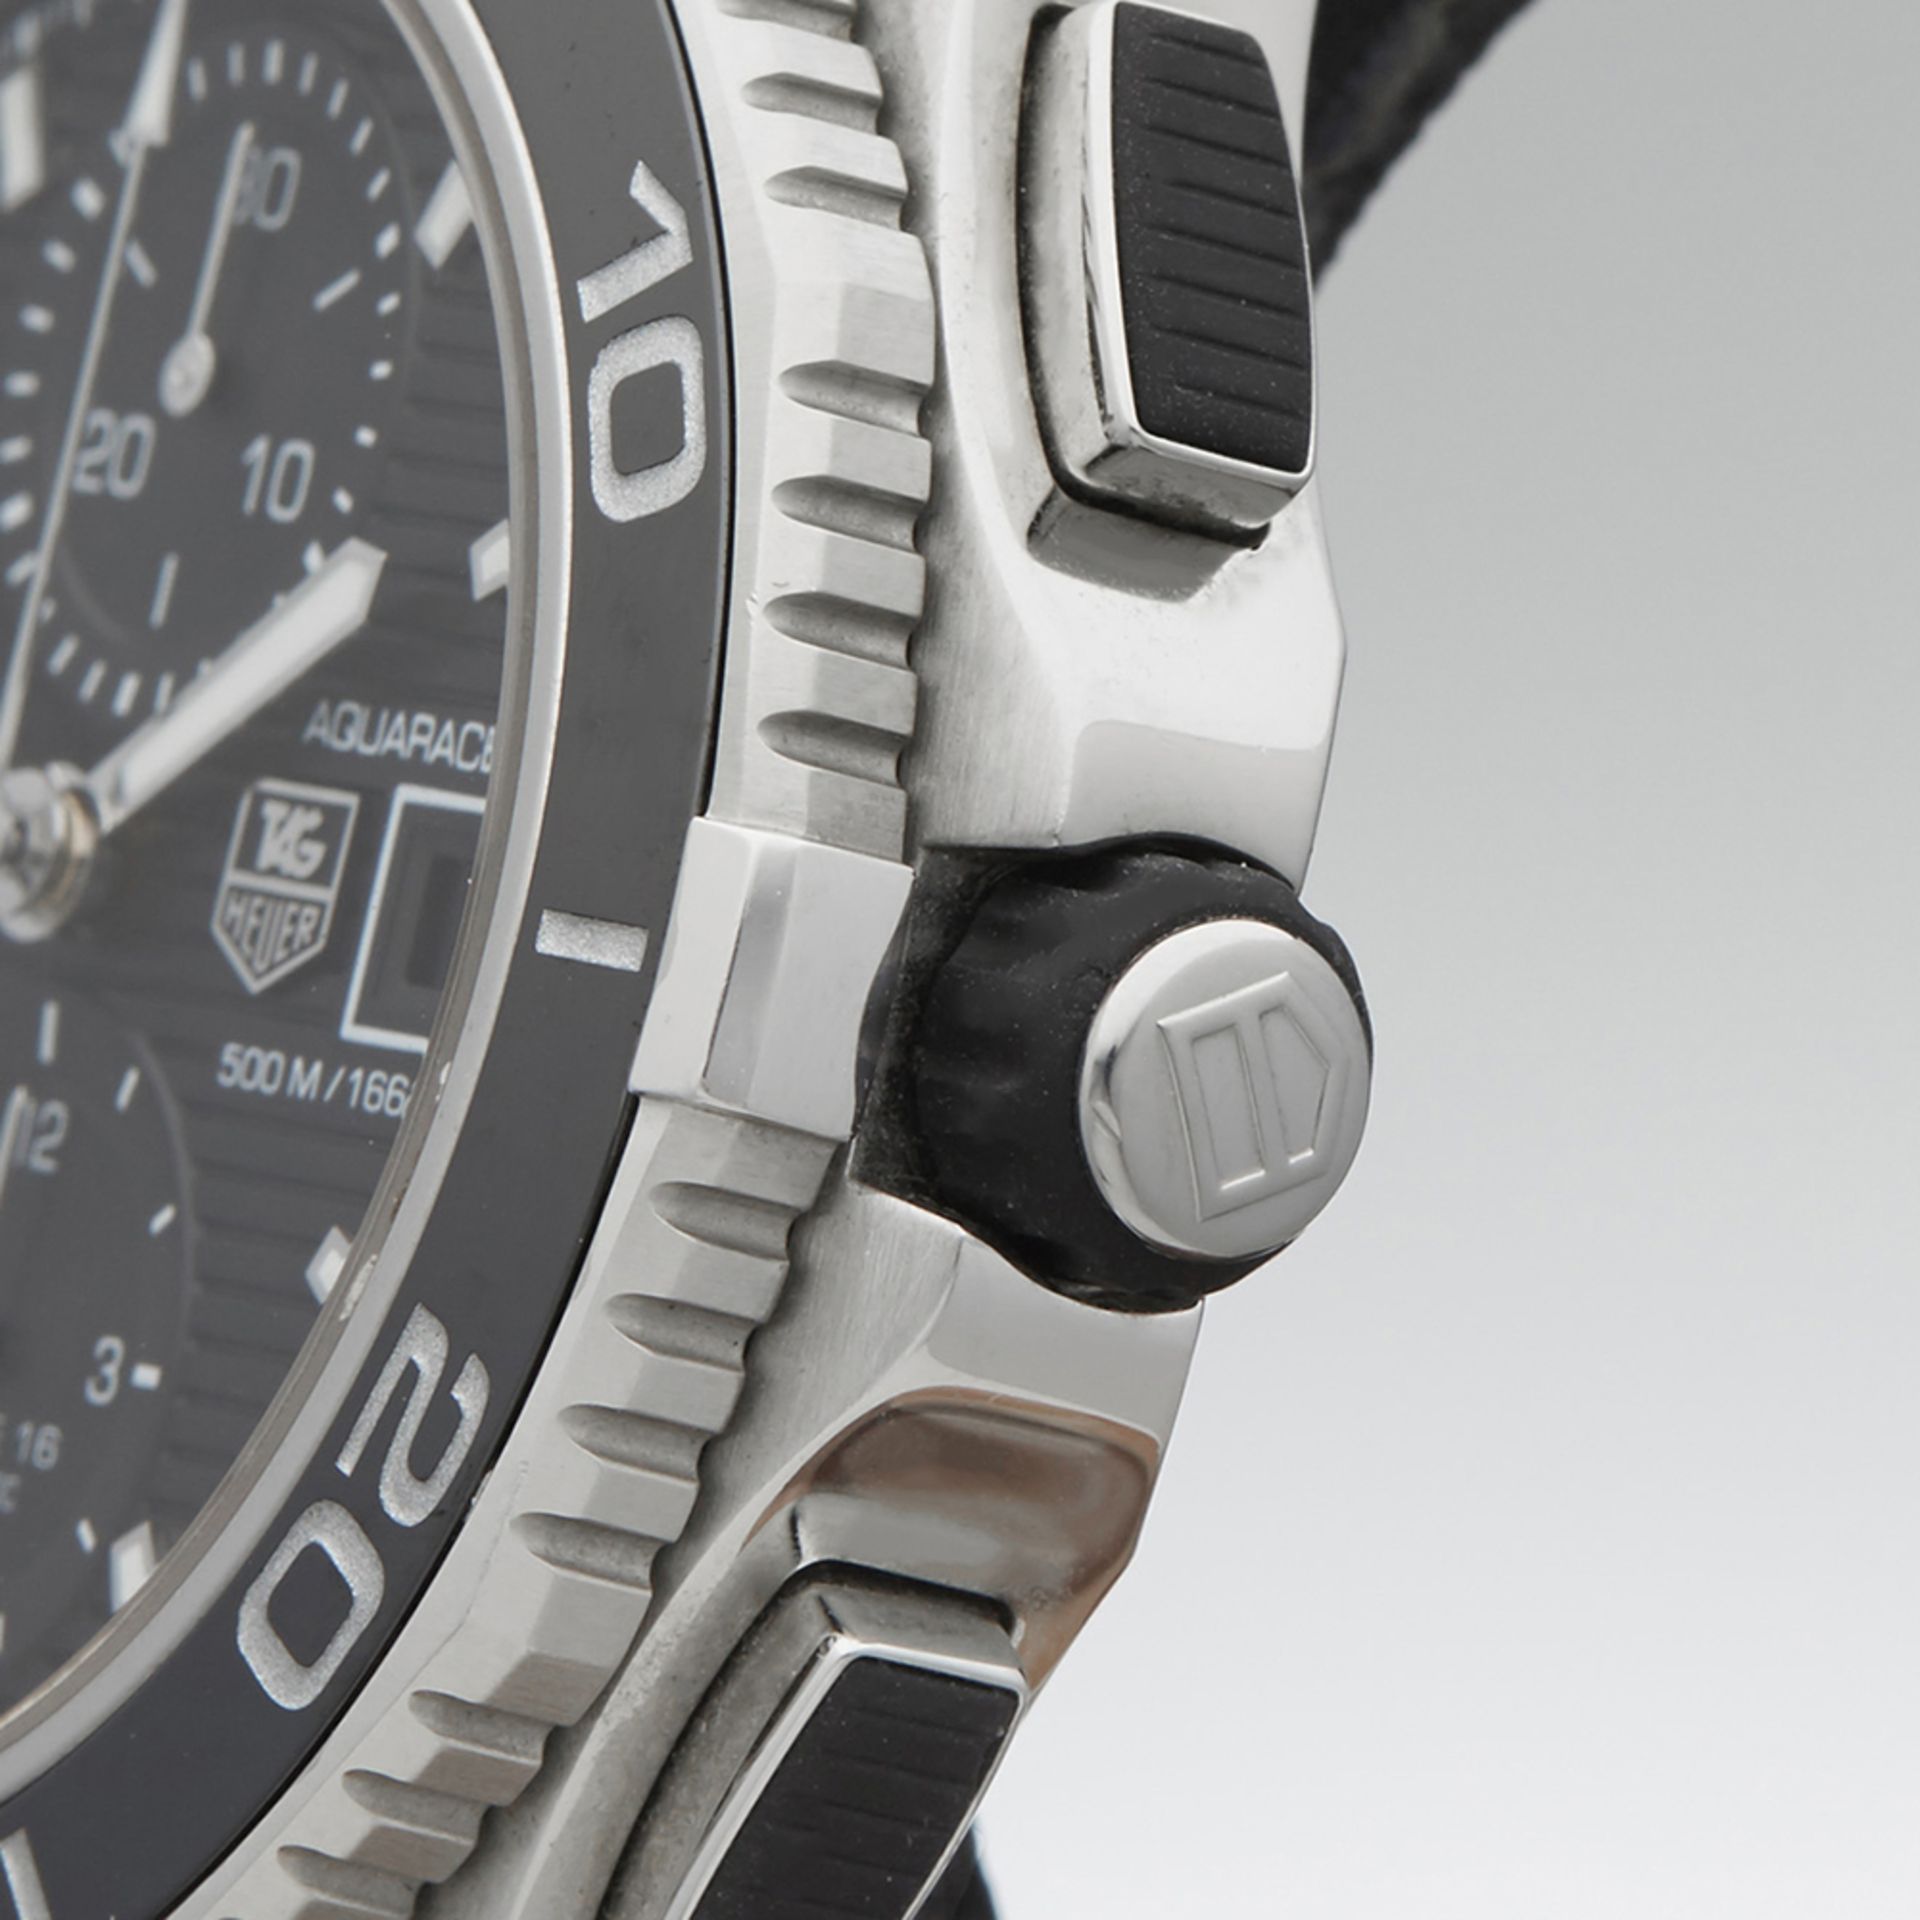 Tag Heuer, Aquaracer Chronograph Ceramic 43mm Stainless Steel CAK2110.BA0833 - Image 4 of 8